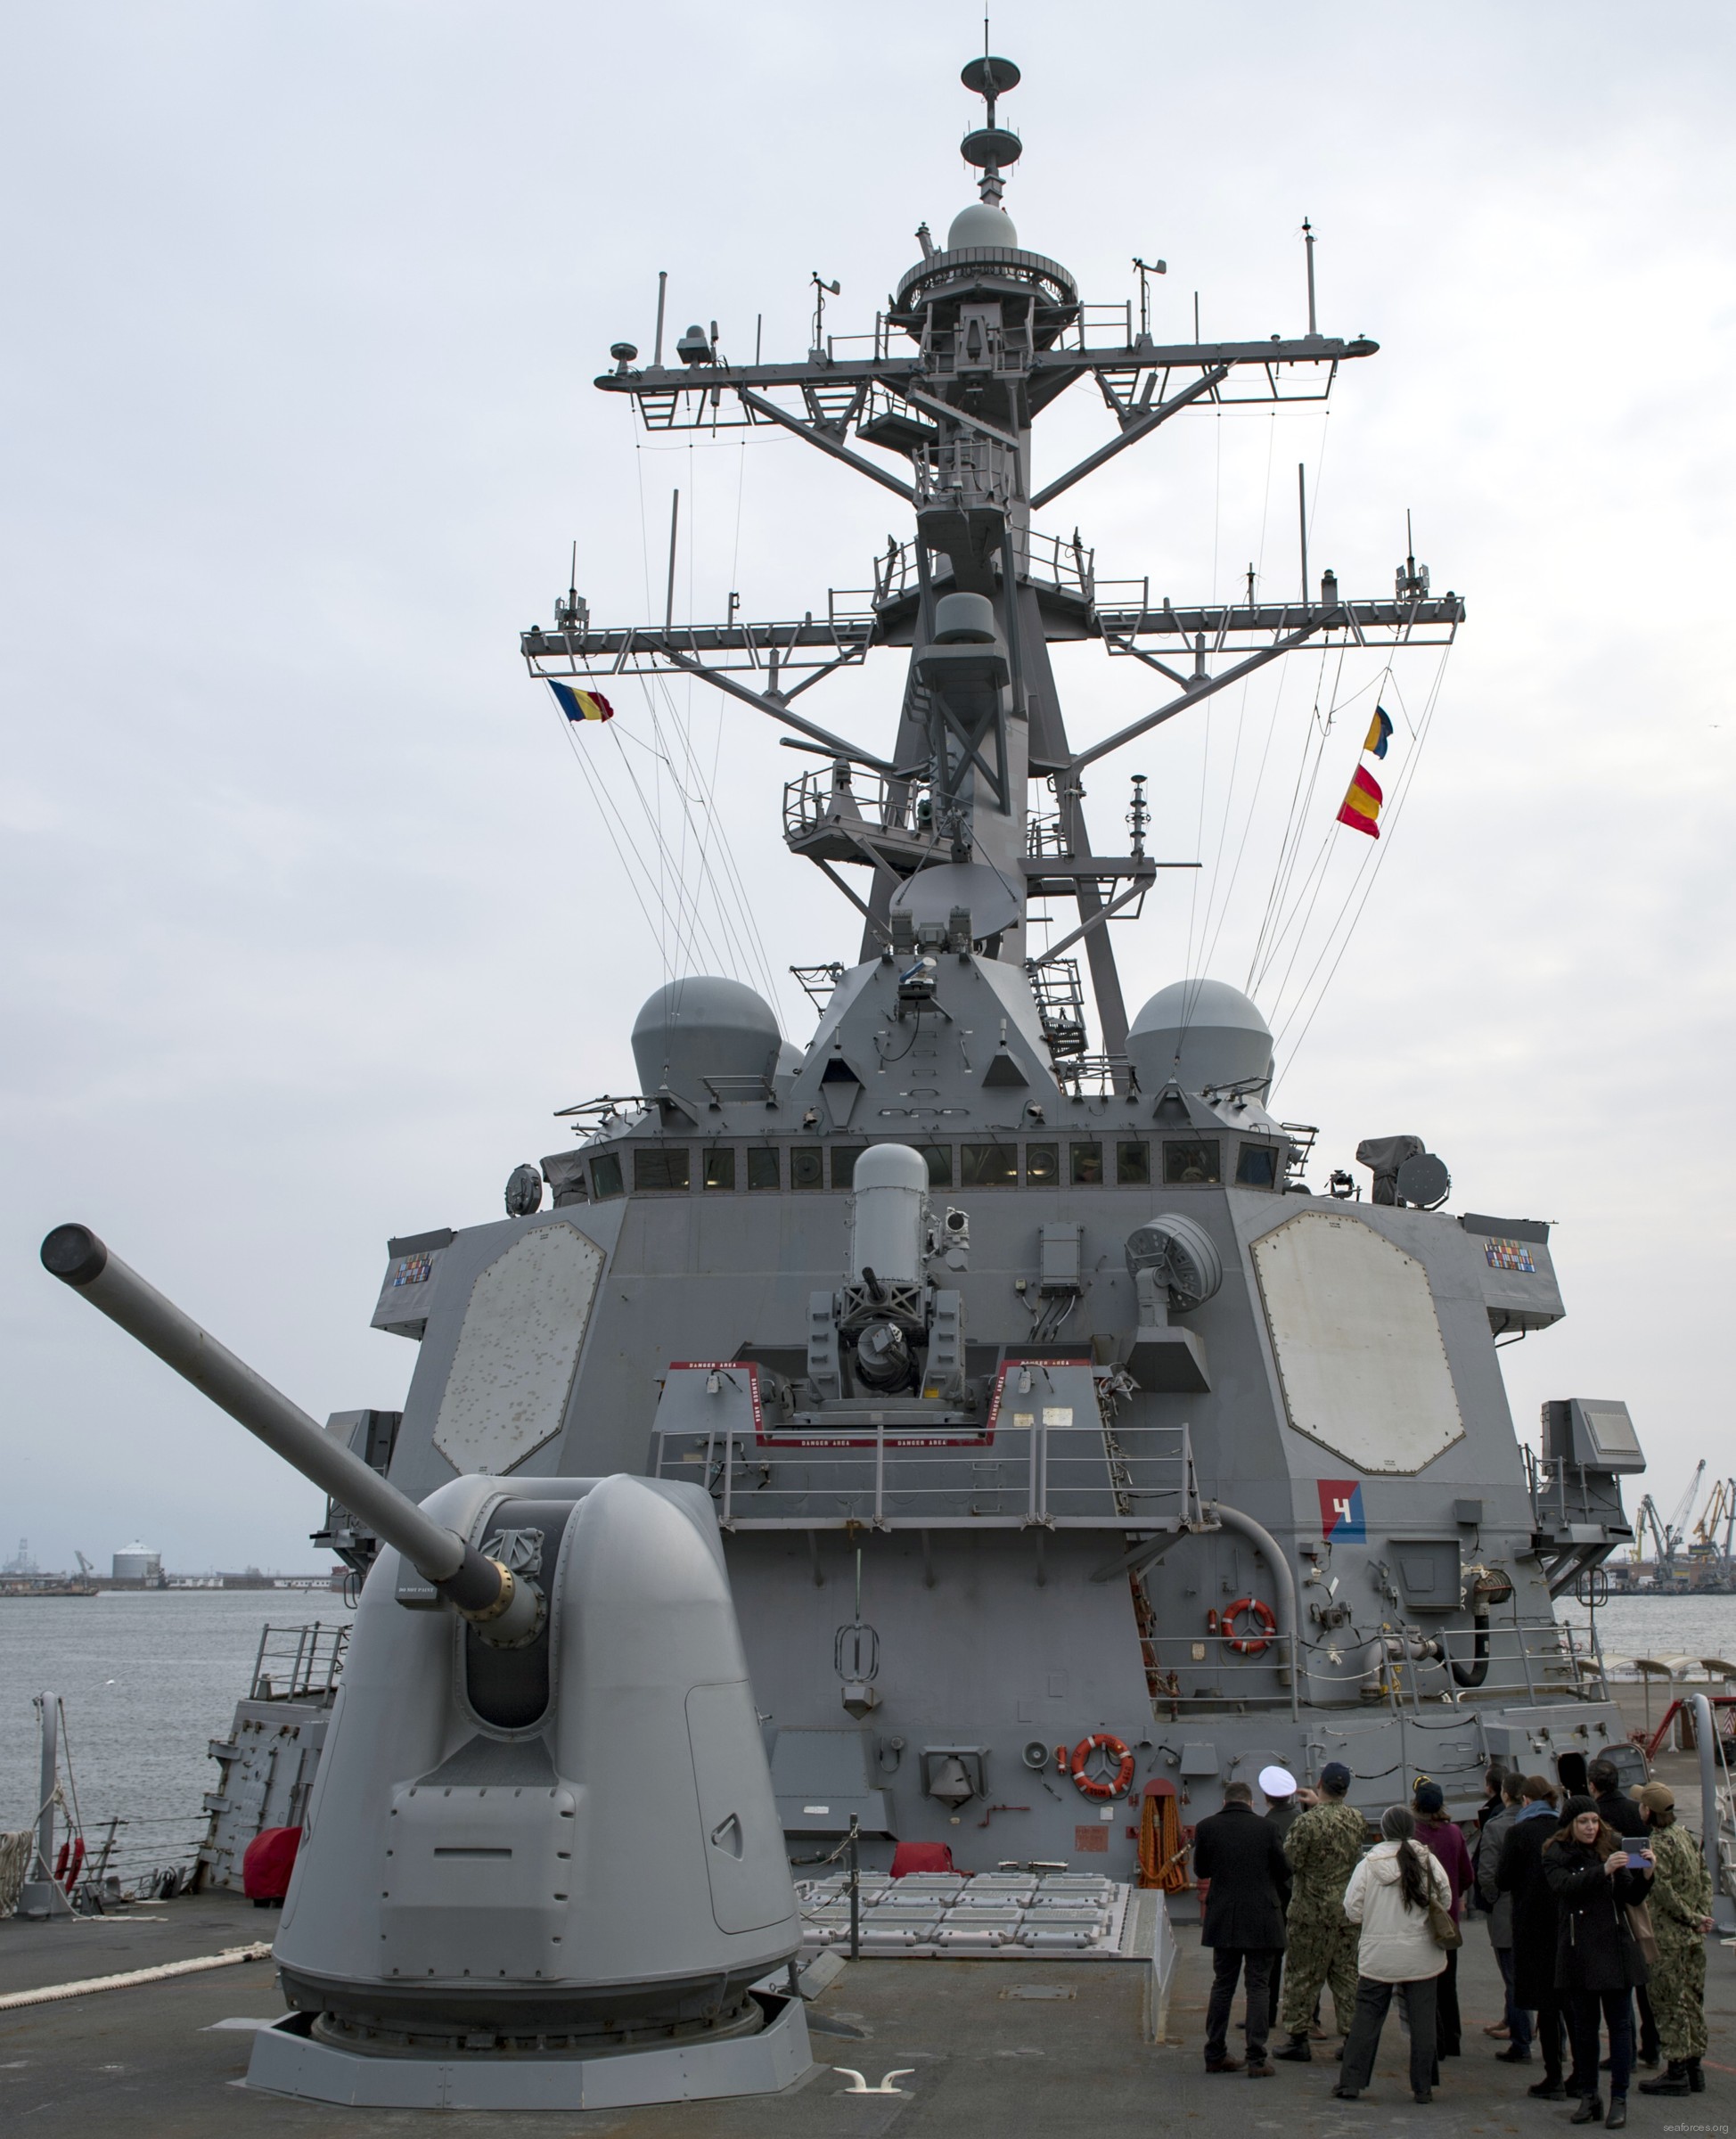 ddg-71 uss ross guided missile destroyer arleigh burke class aegis bmd 22